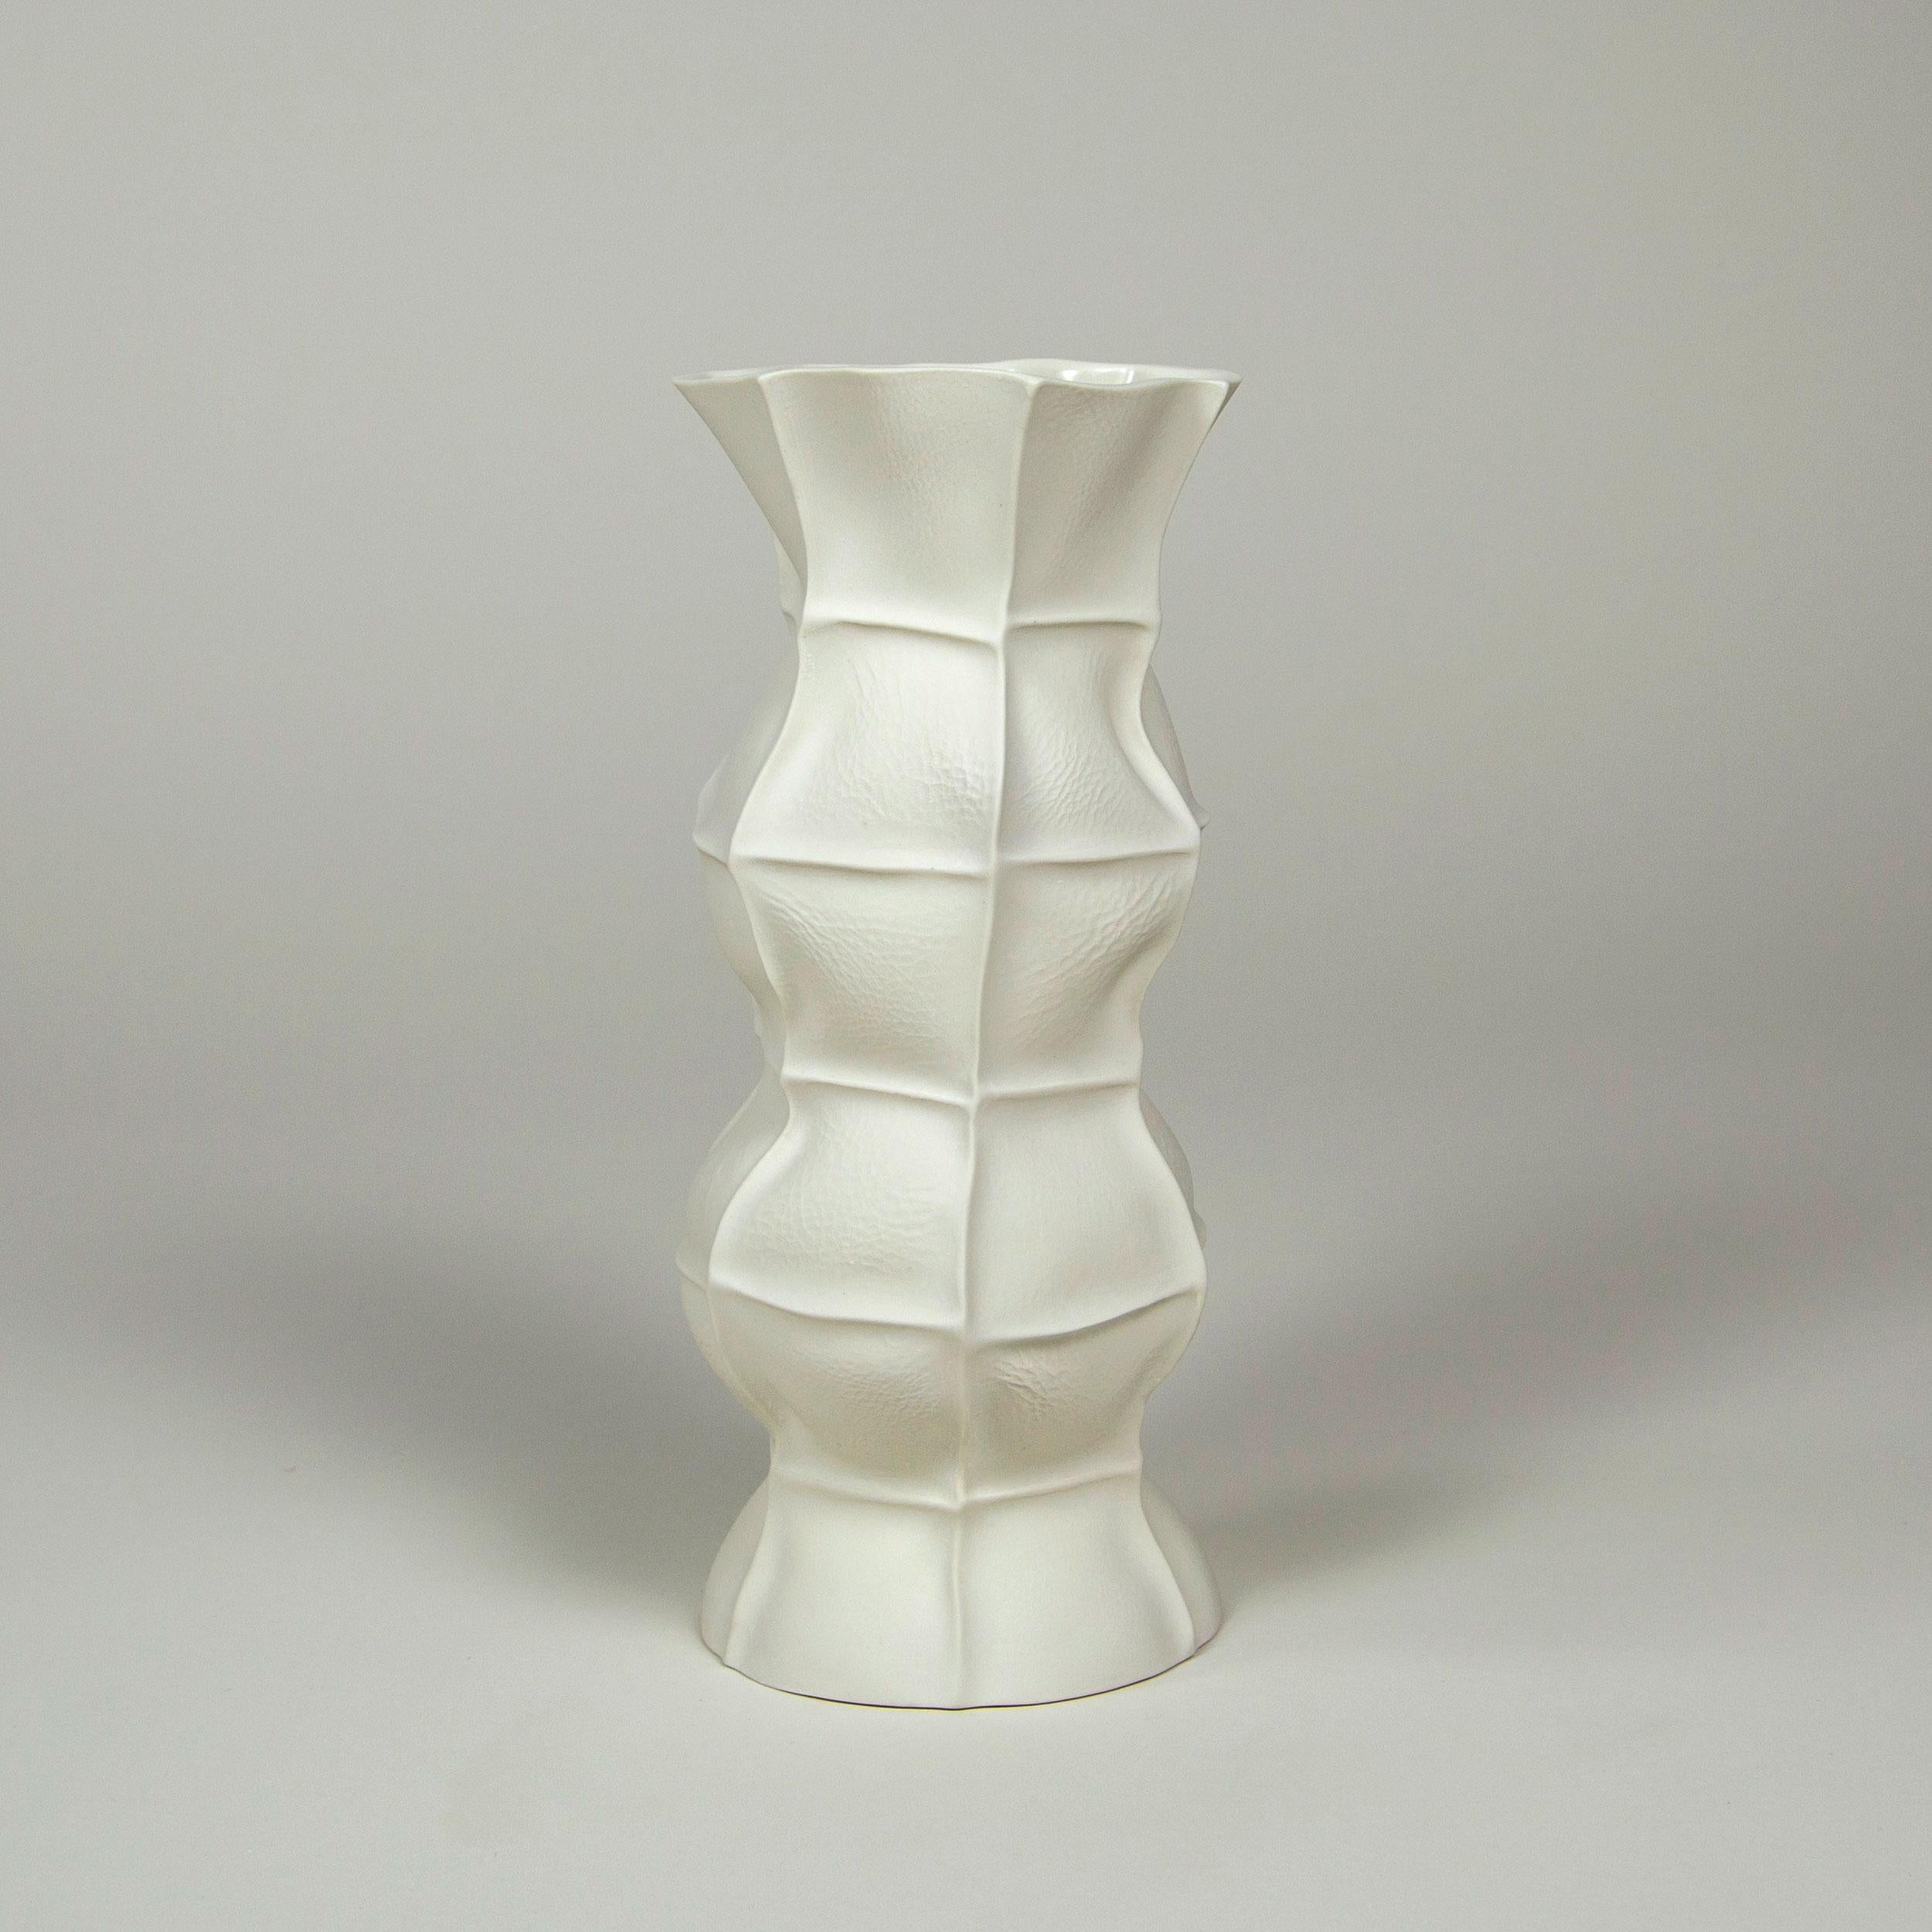 Sculptural Ceramic White Kawa Vase, Set of 5, Organic Leather Cast Porcelain In New Condition For Sale In Brooklyn, NY